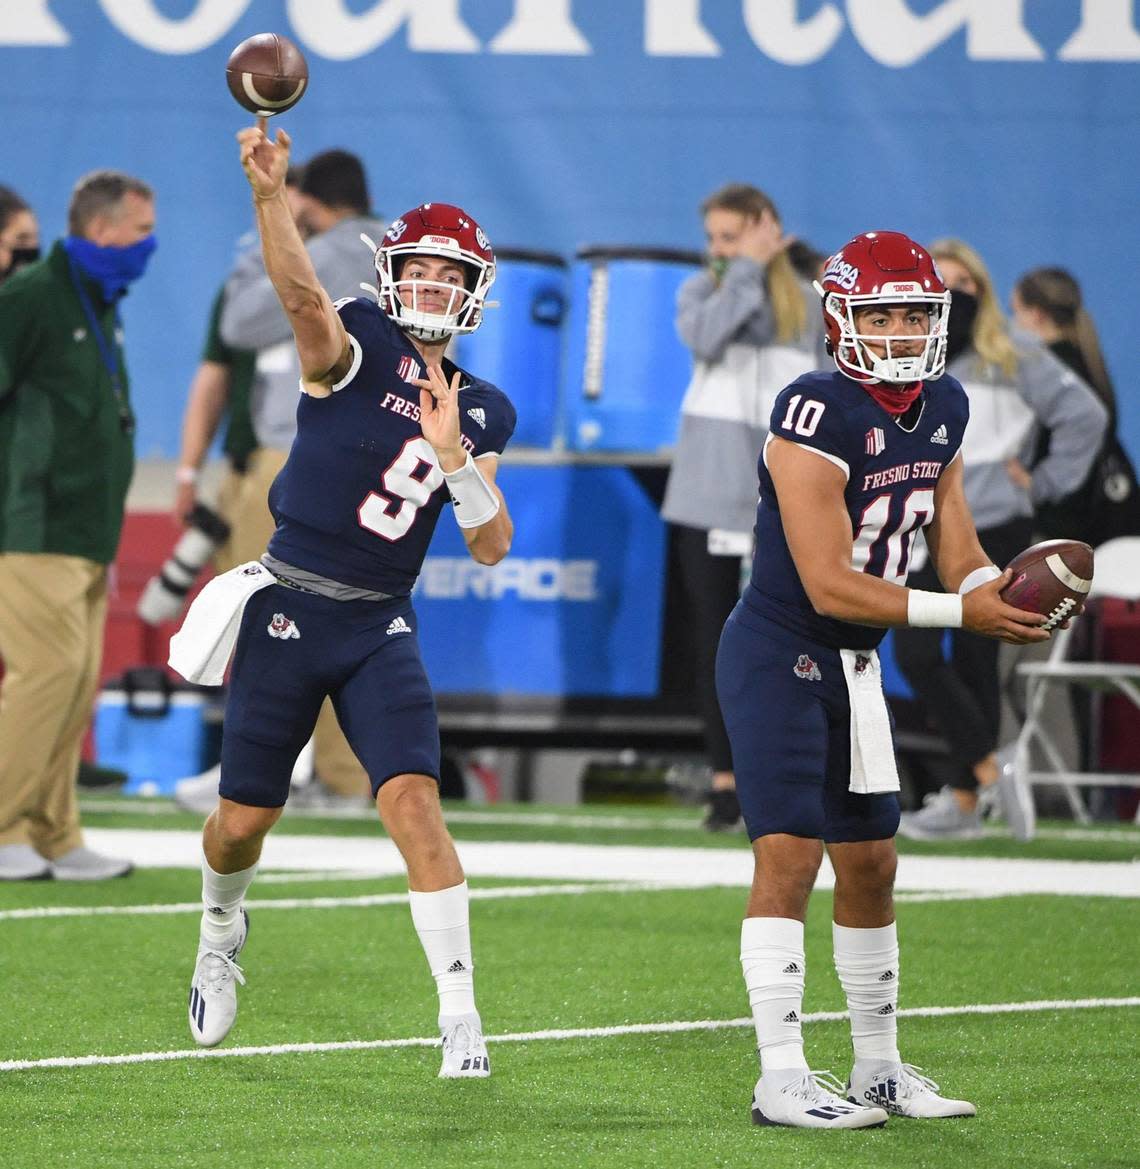 Fresno State quarterback Jake Haener, left, warms up as backup quarterback Logan Fife gets ready for his turn before the start of their game against Colorado State at Bulldog Stadium on Thursday, Oct. 29, 2020.